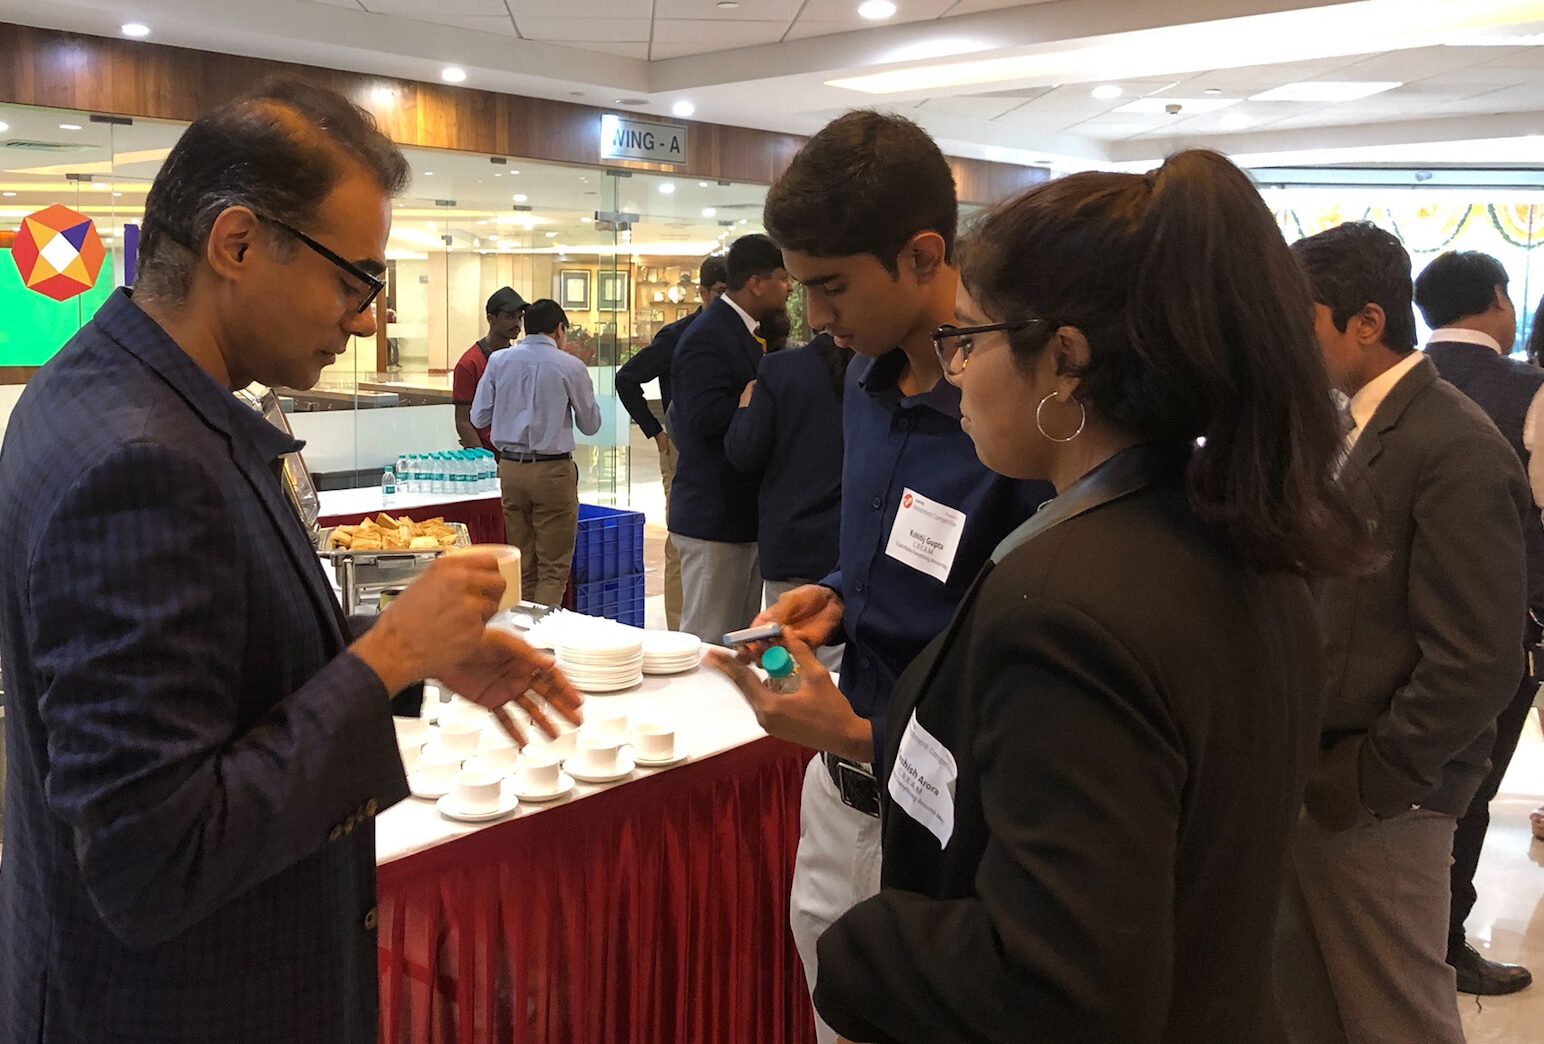 Judge Rajesh Sehgal (left) talks to members of the team CREAM (Cash Rules Everything Around Me).